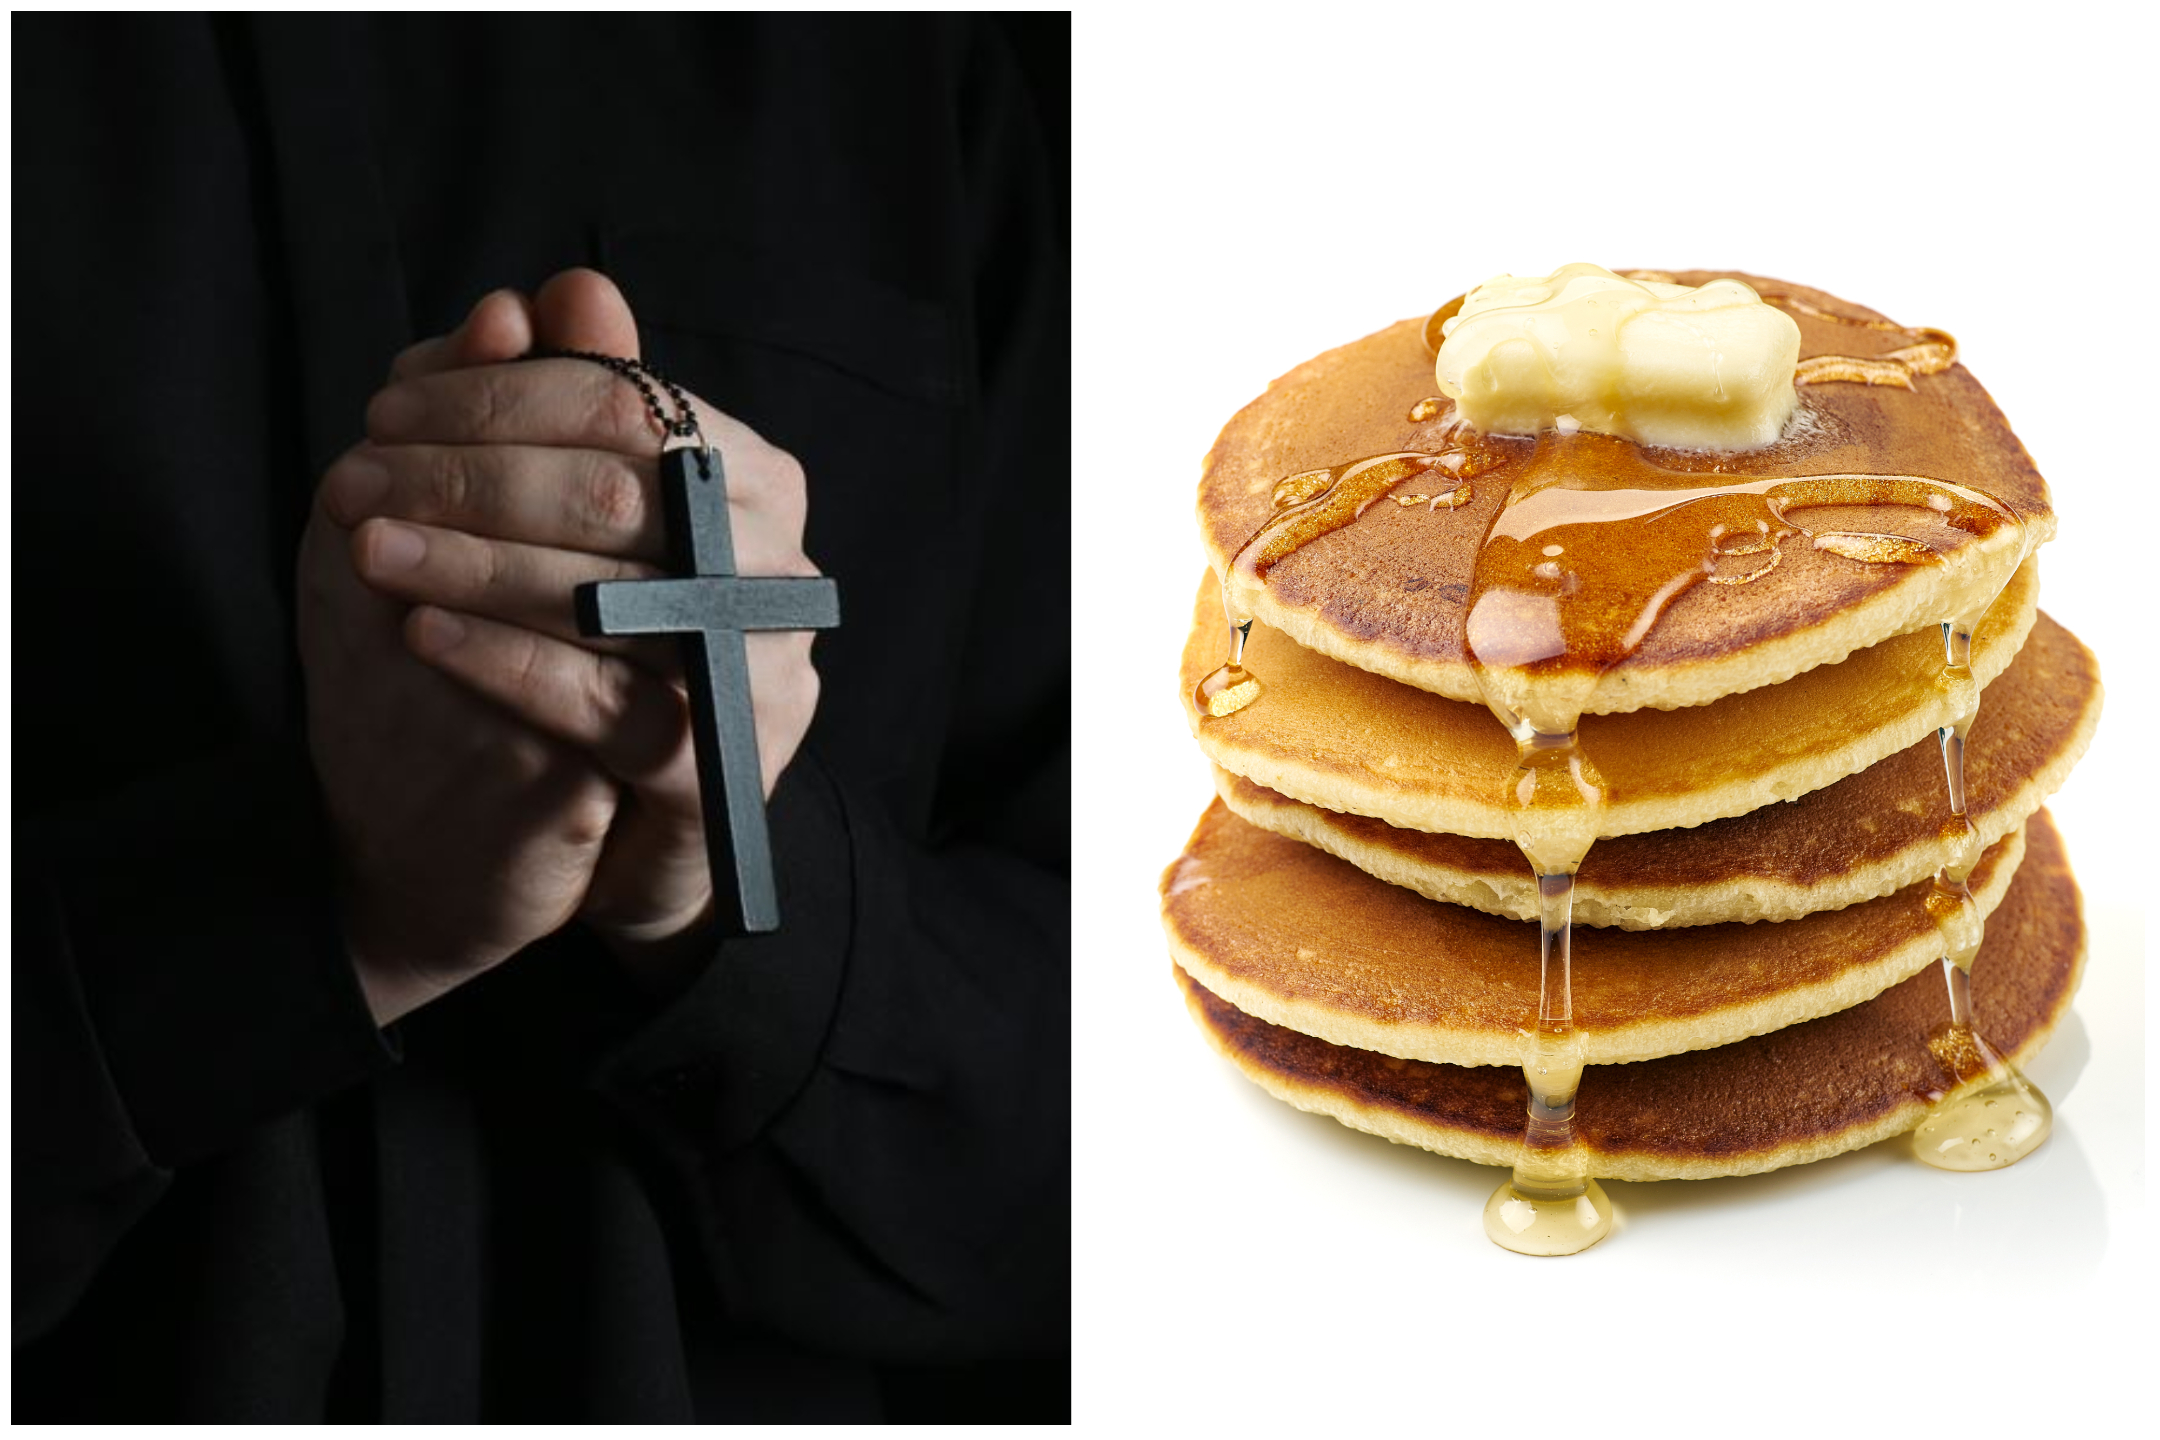 Pastor Says Wives Must Obey Husbands, Make Pancakes If They Demand